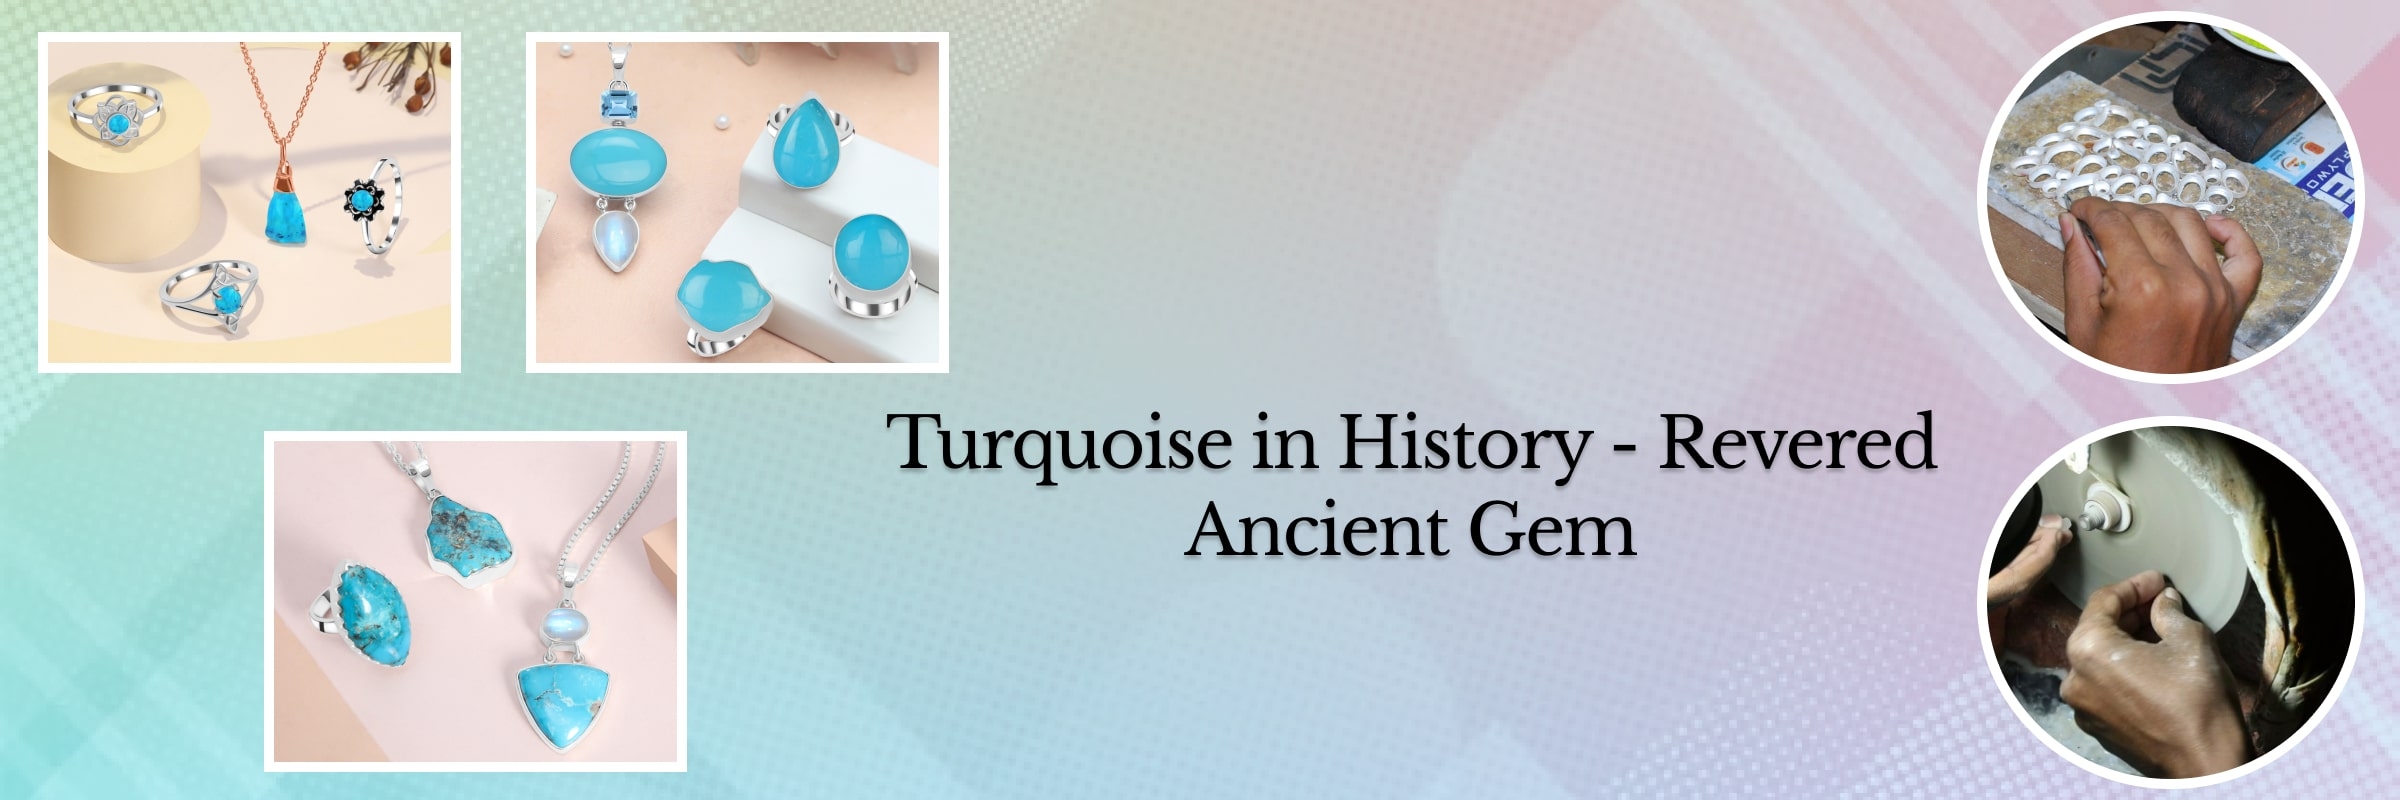 Revered Status of Turquoise in Ancient Civilizations